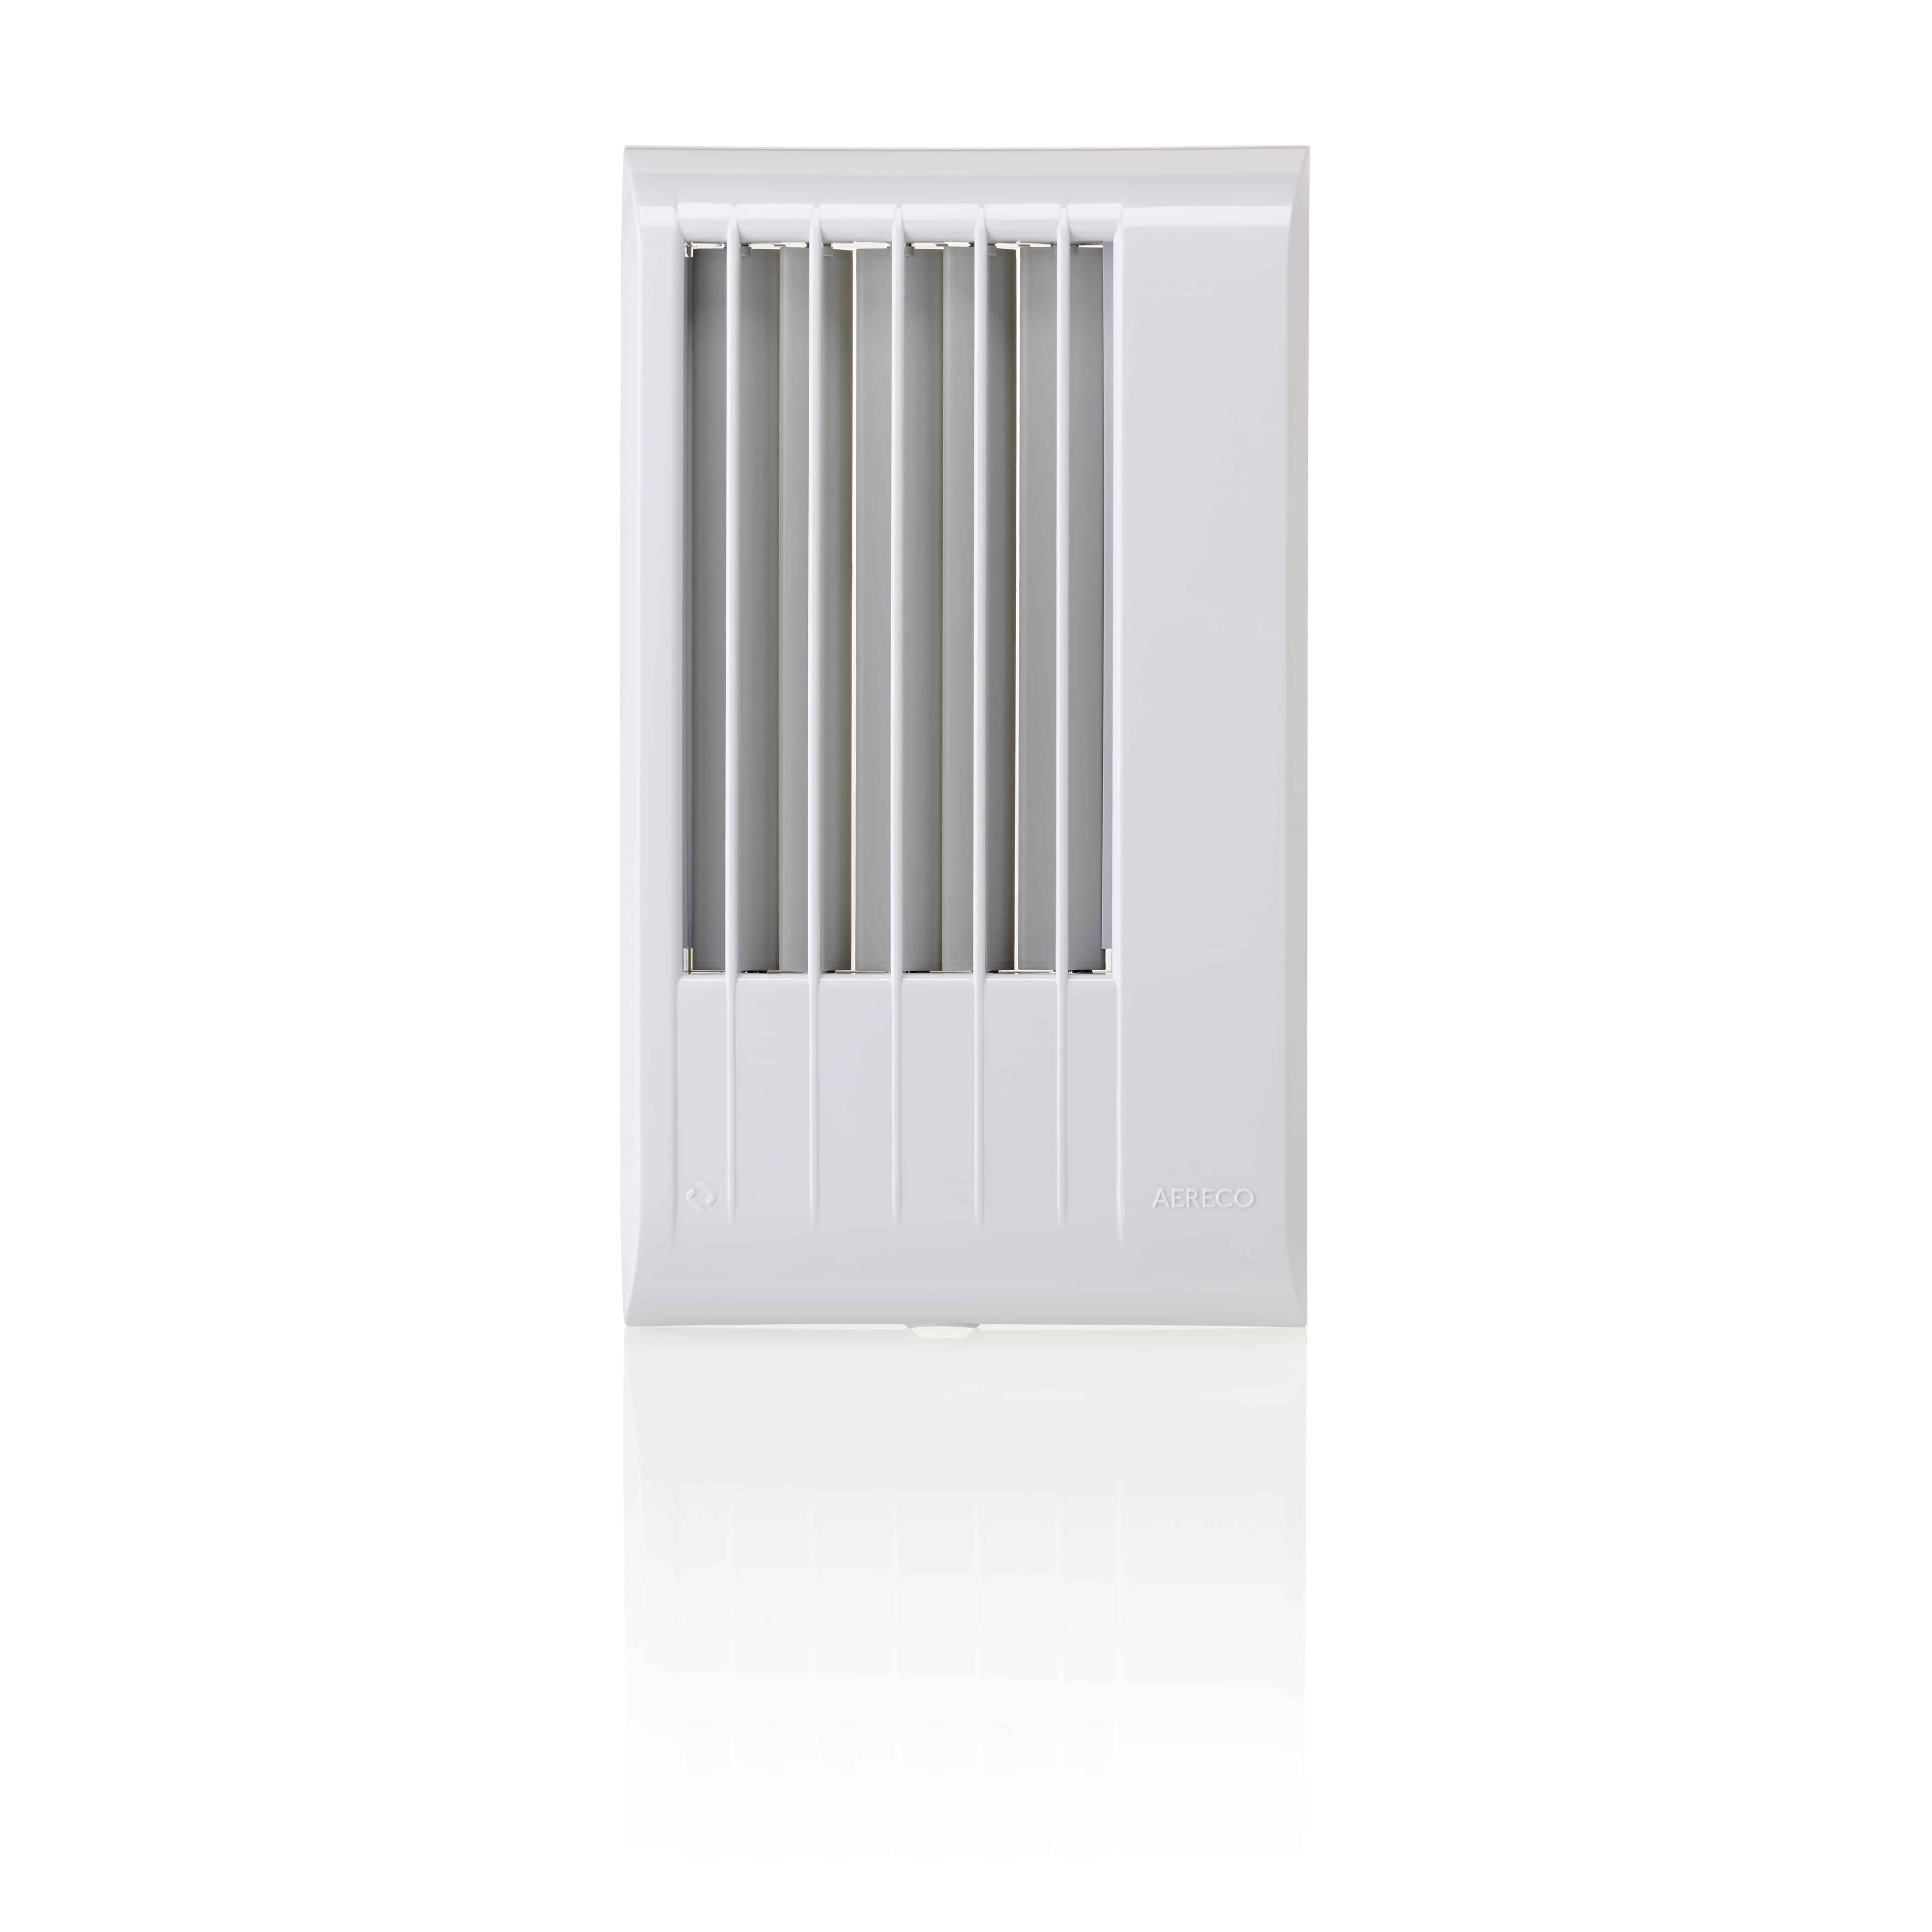 2. Grille d'extraction G2H